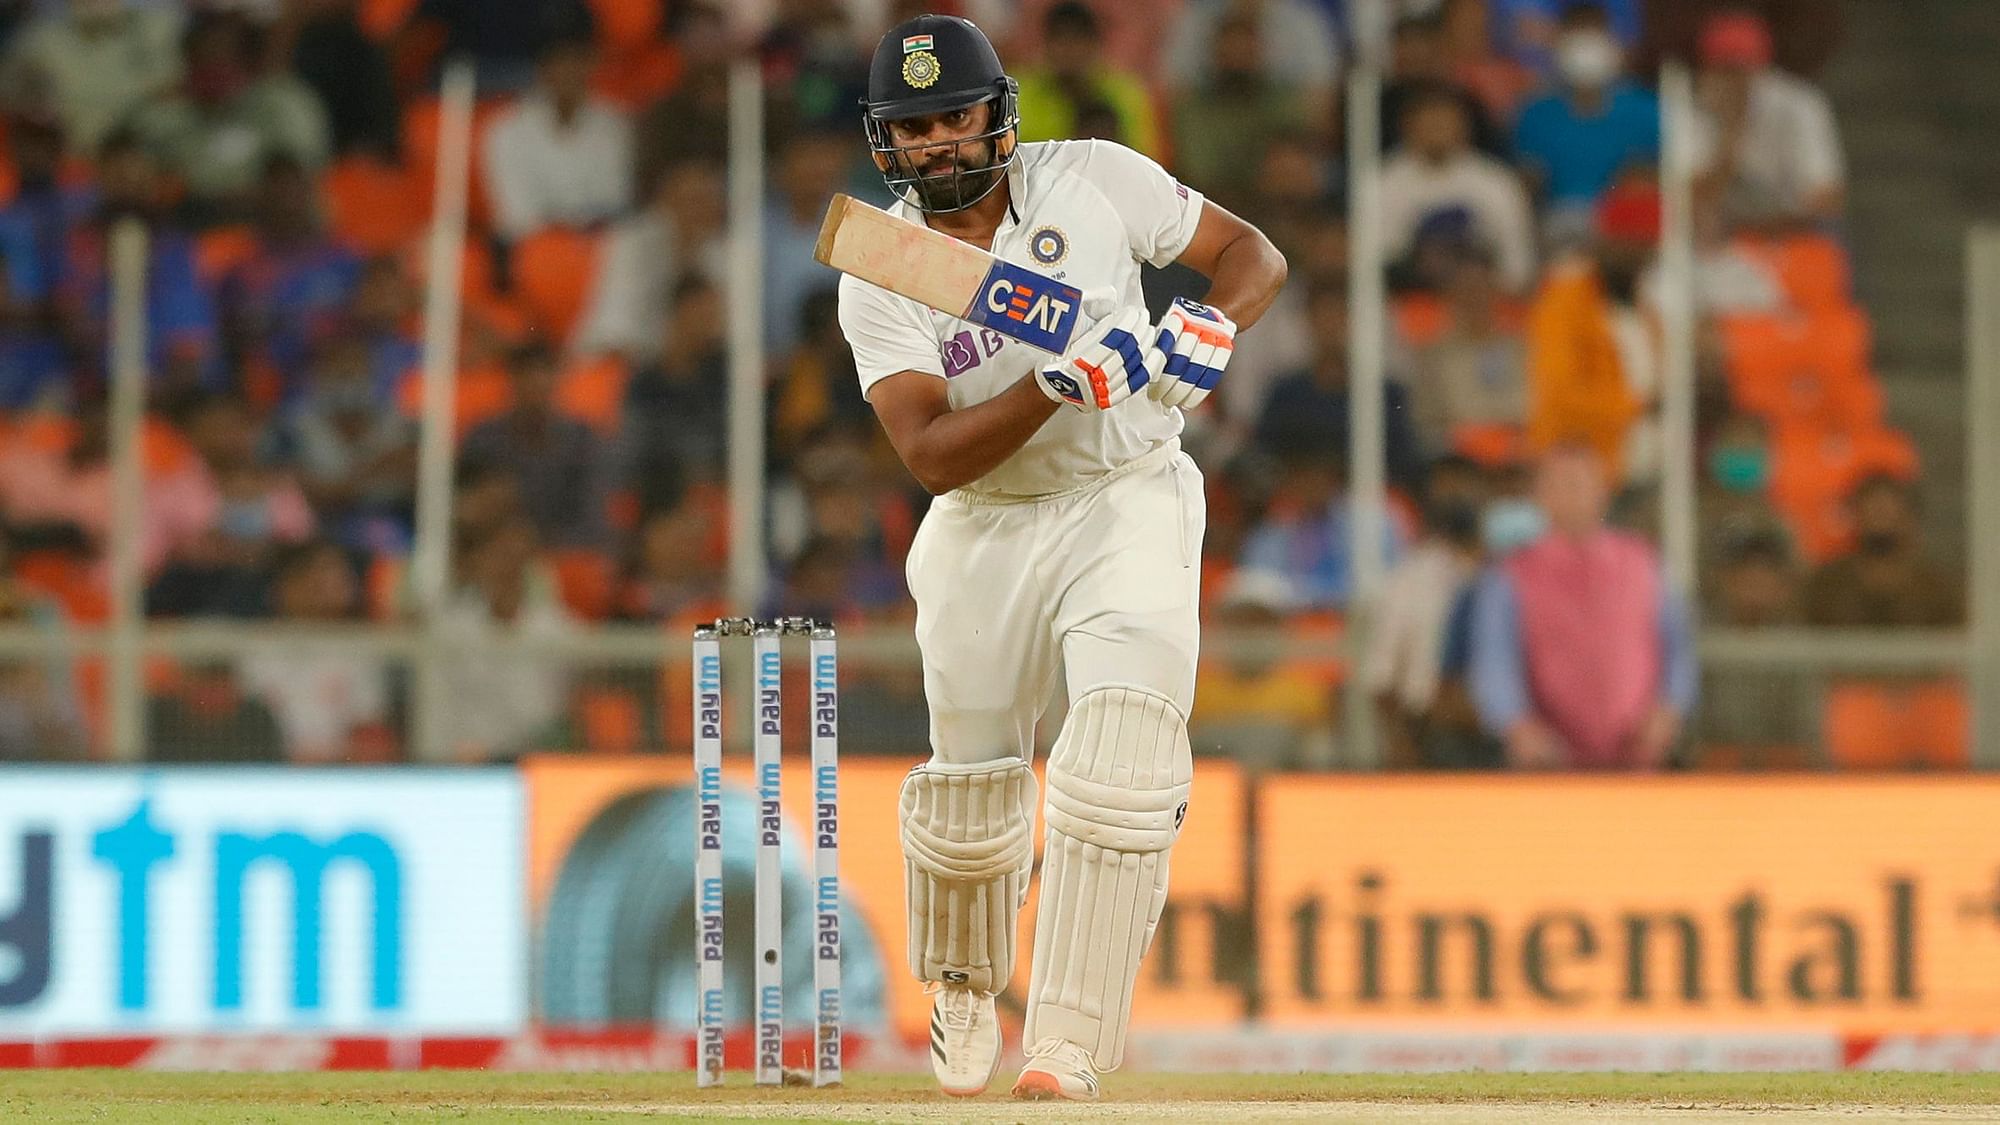 Pink Ball Test Axar Patel Picks 6, Rohit Sharma Scores 50 to Put India on Top Against England